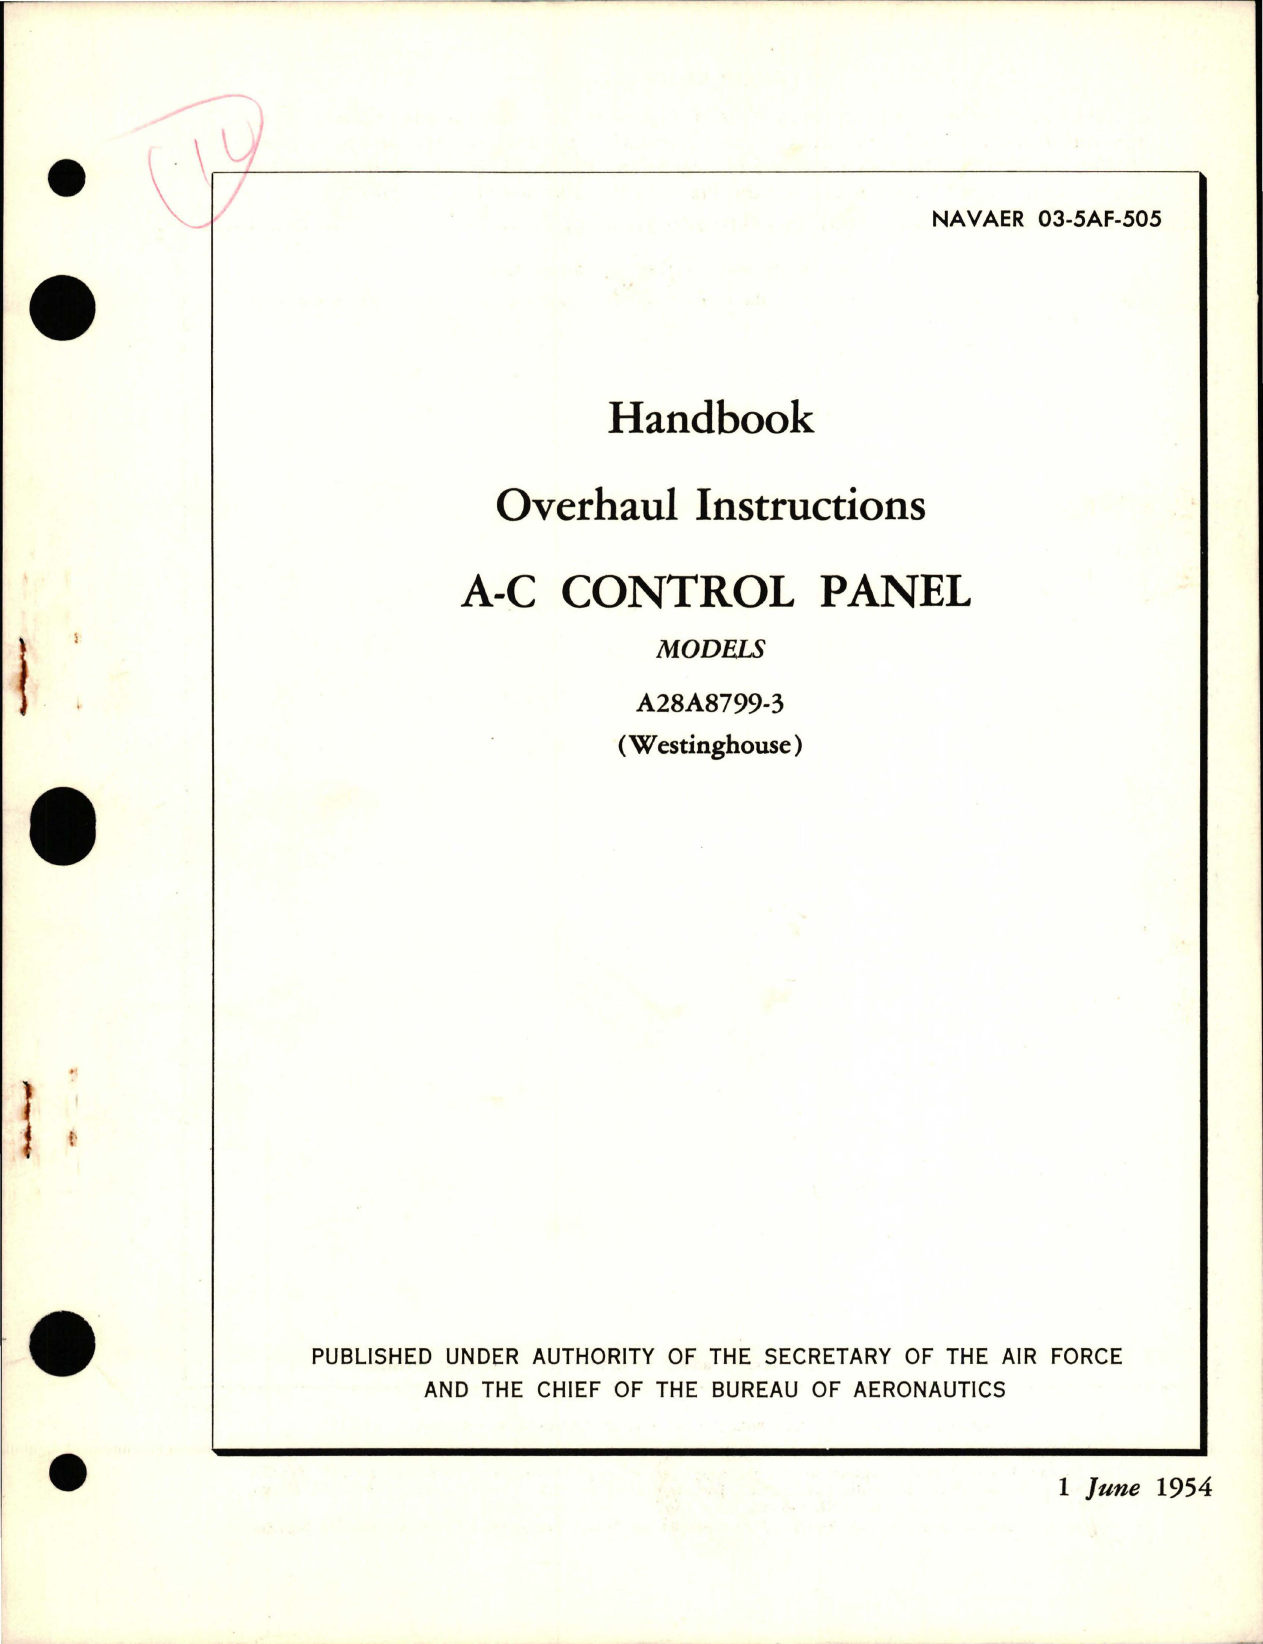 Sample page 1 from AirCorps Library document: Overhaul Instructions for AC Control Panel - Model A28A8799-3